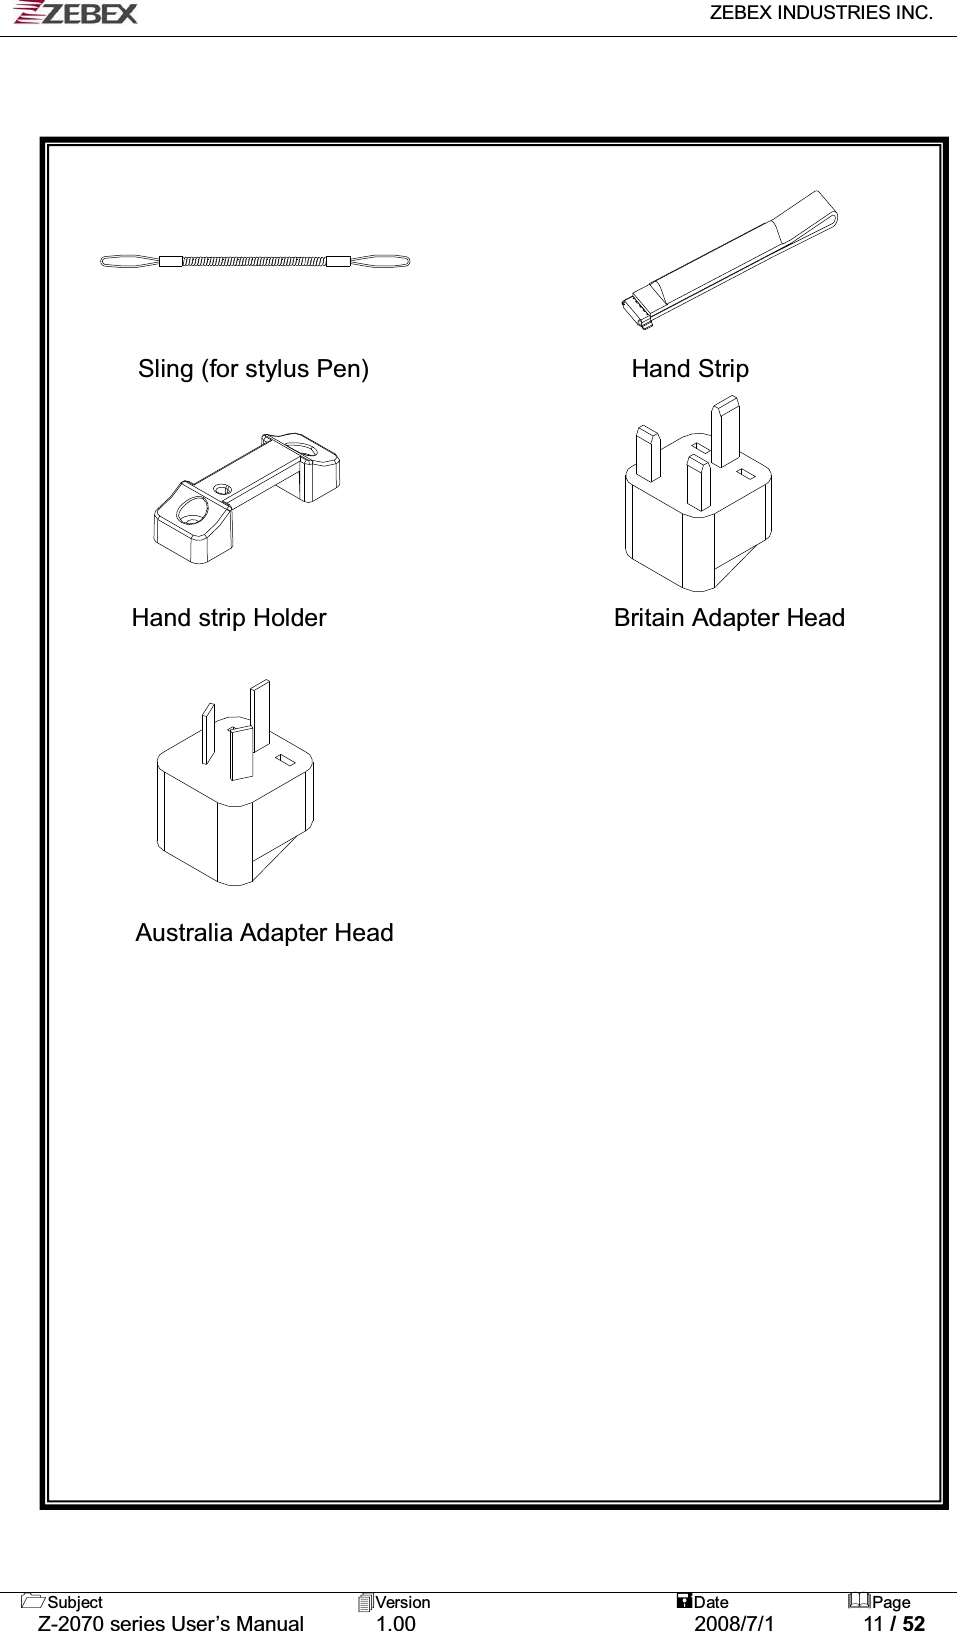   ZEBEX INDUSTRIES INC.   Subject Version  Date Page   Z-2070 series User’s Manual  1.00  2008/7/1  11 / 52          Sling (for stylus Pen)                     Hand Strip       Hand strip Holder                       Britain Adapter Head           Australia Adapter Head 